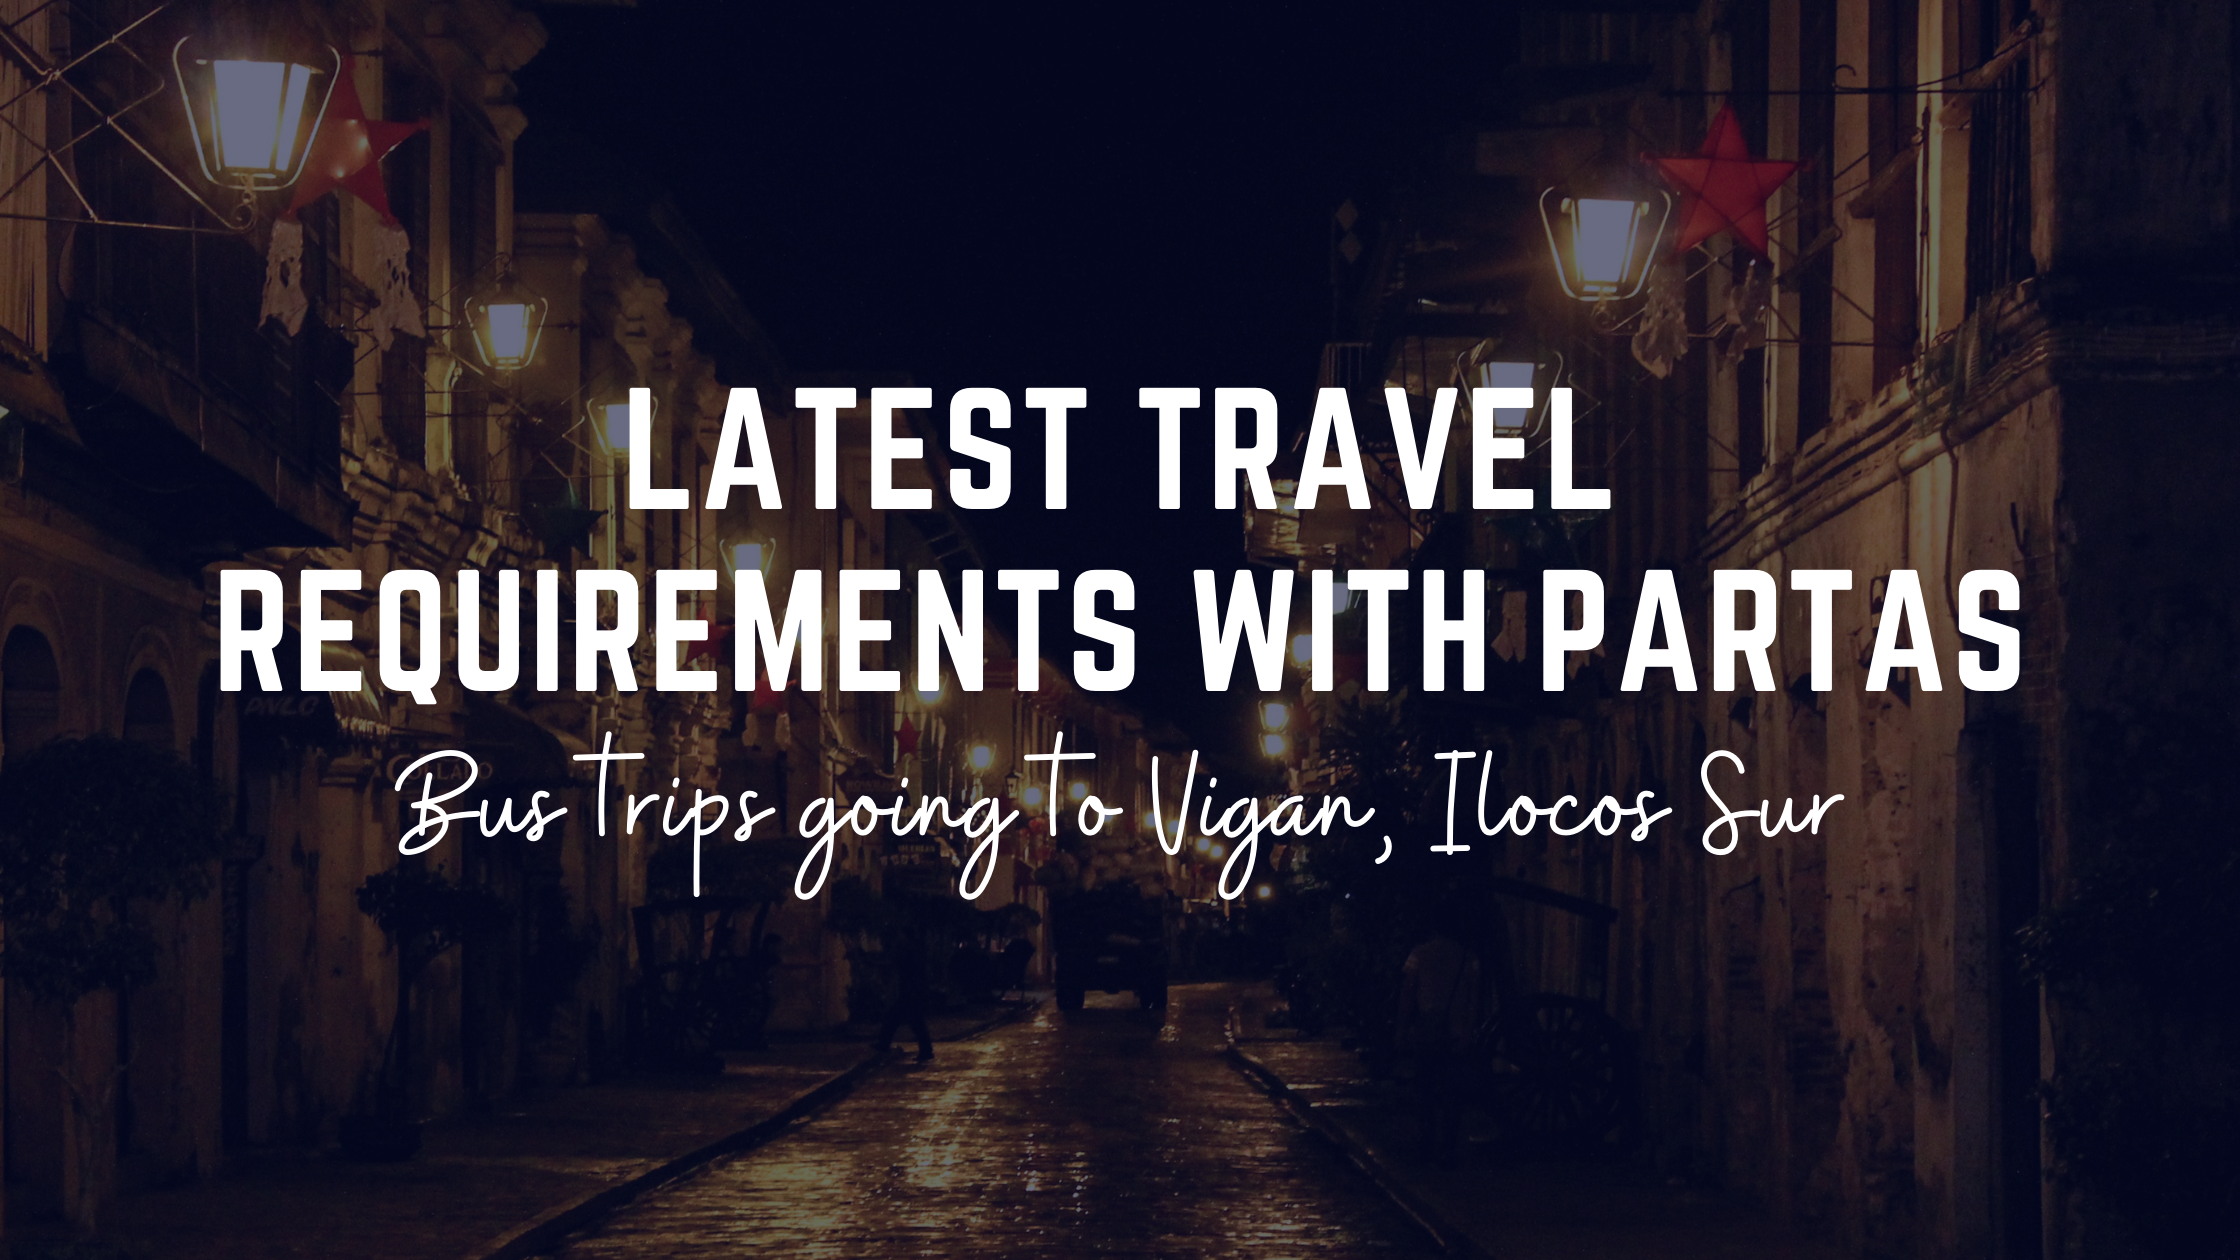 Latest Travel Requirements with Partas